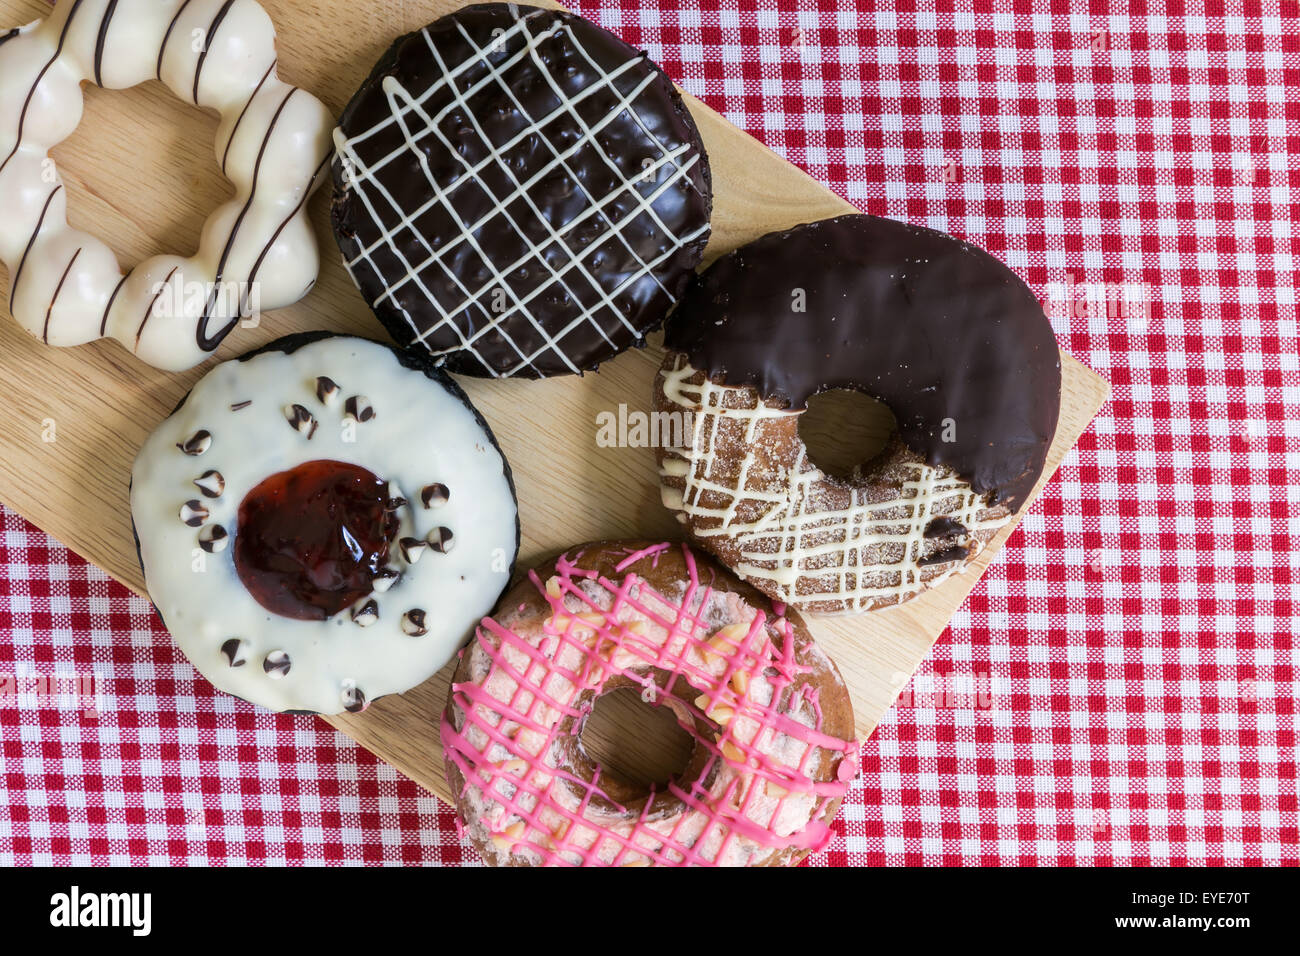 Doughnut Time High Resolution Stock Photography and Images - Alamy